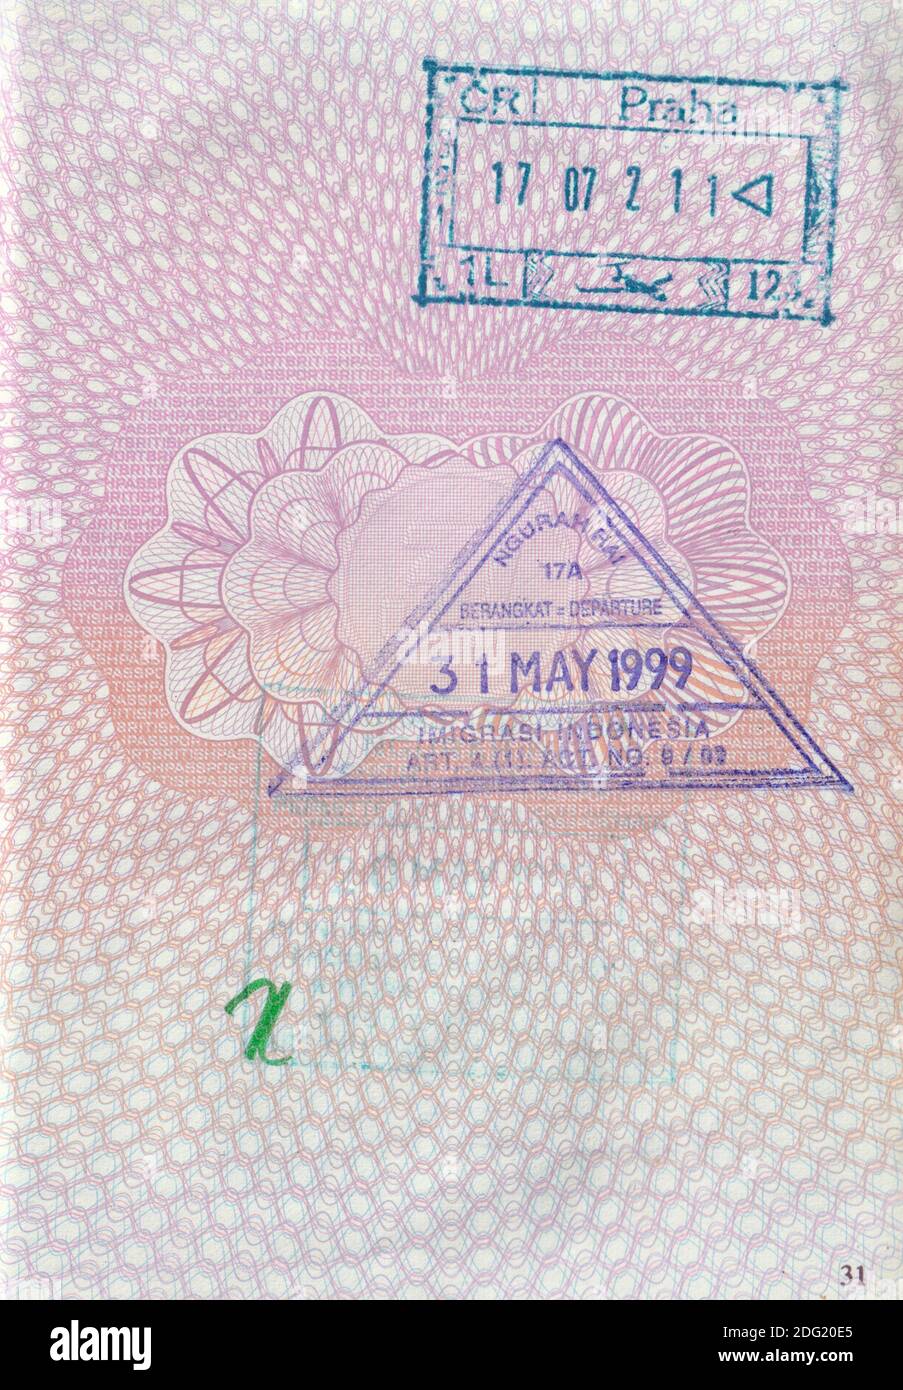 UK passport page with 1999 Indonesia entry/exit stamp and 2002 Czech Republic stamp (Prague Airport) Stock Photo